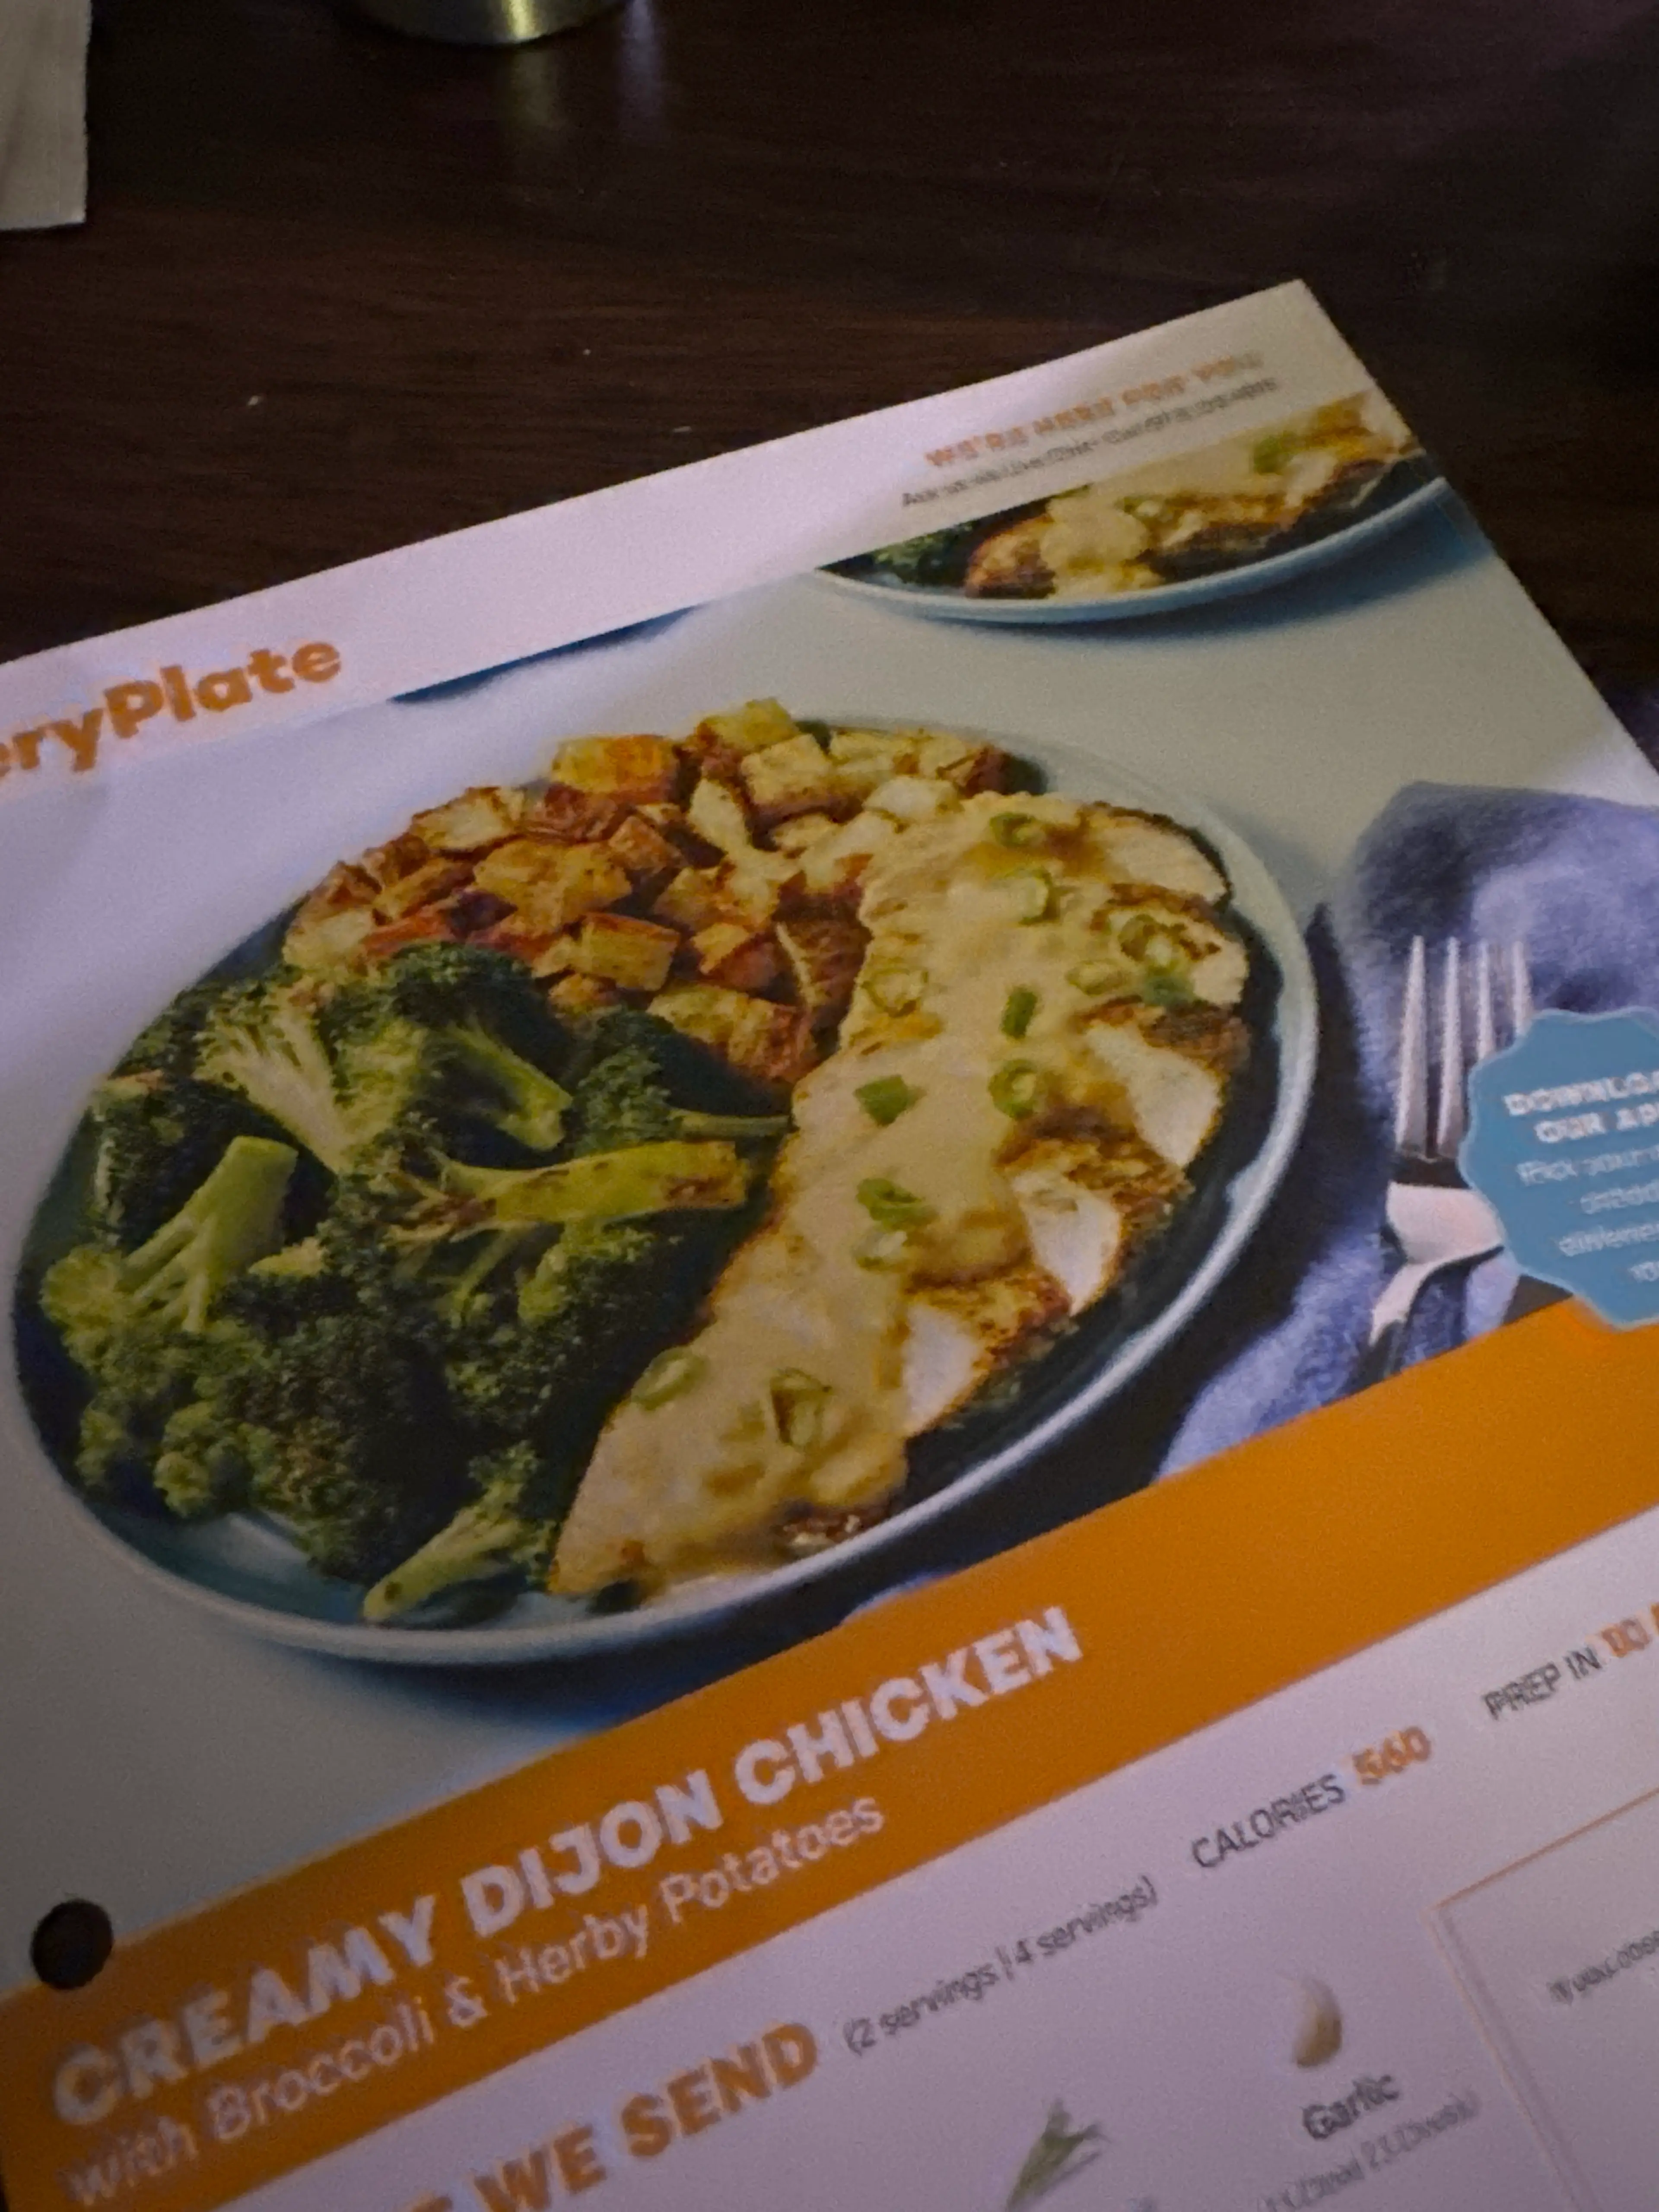 CREAMY DIJON CHICKEN with Broccoli & Herby Potatoes